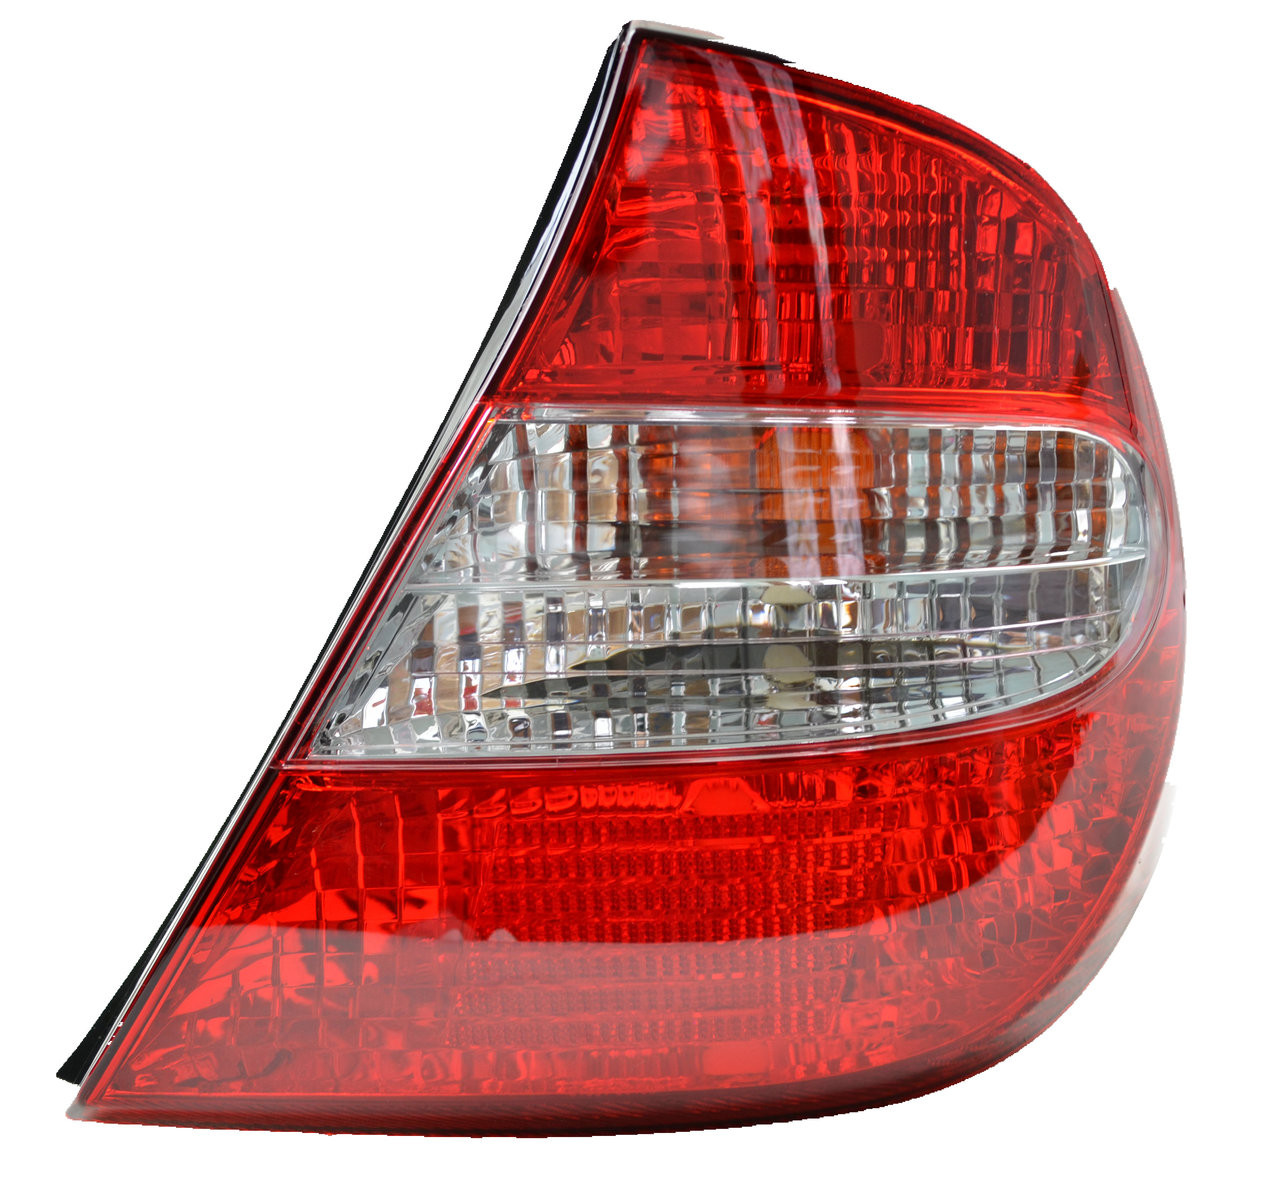 Tail Light for Toyota Camry 09/02 - 08/04 New Right RHS 02 03 04 Rear